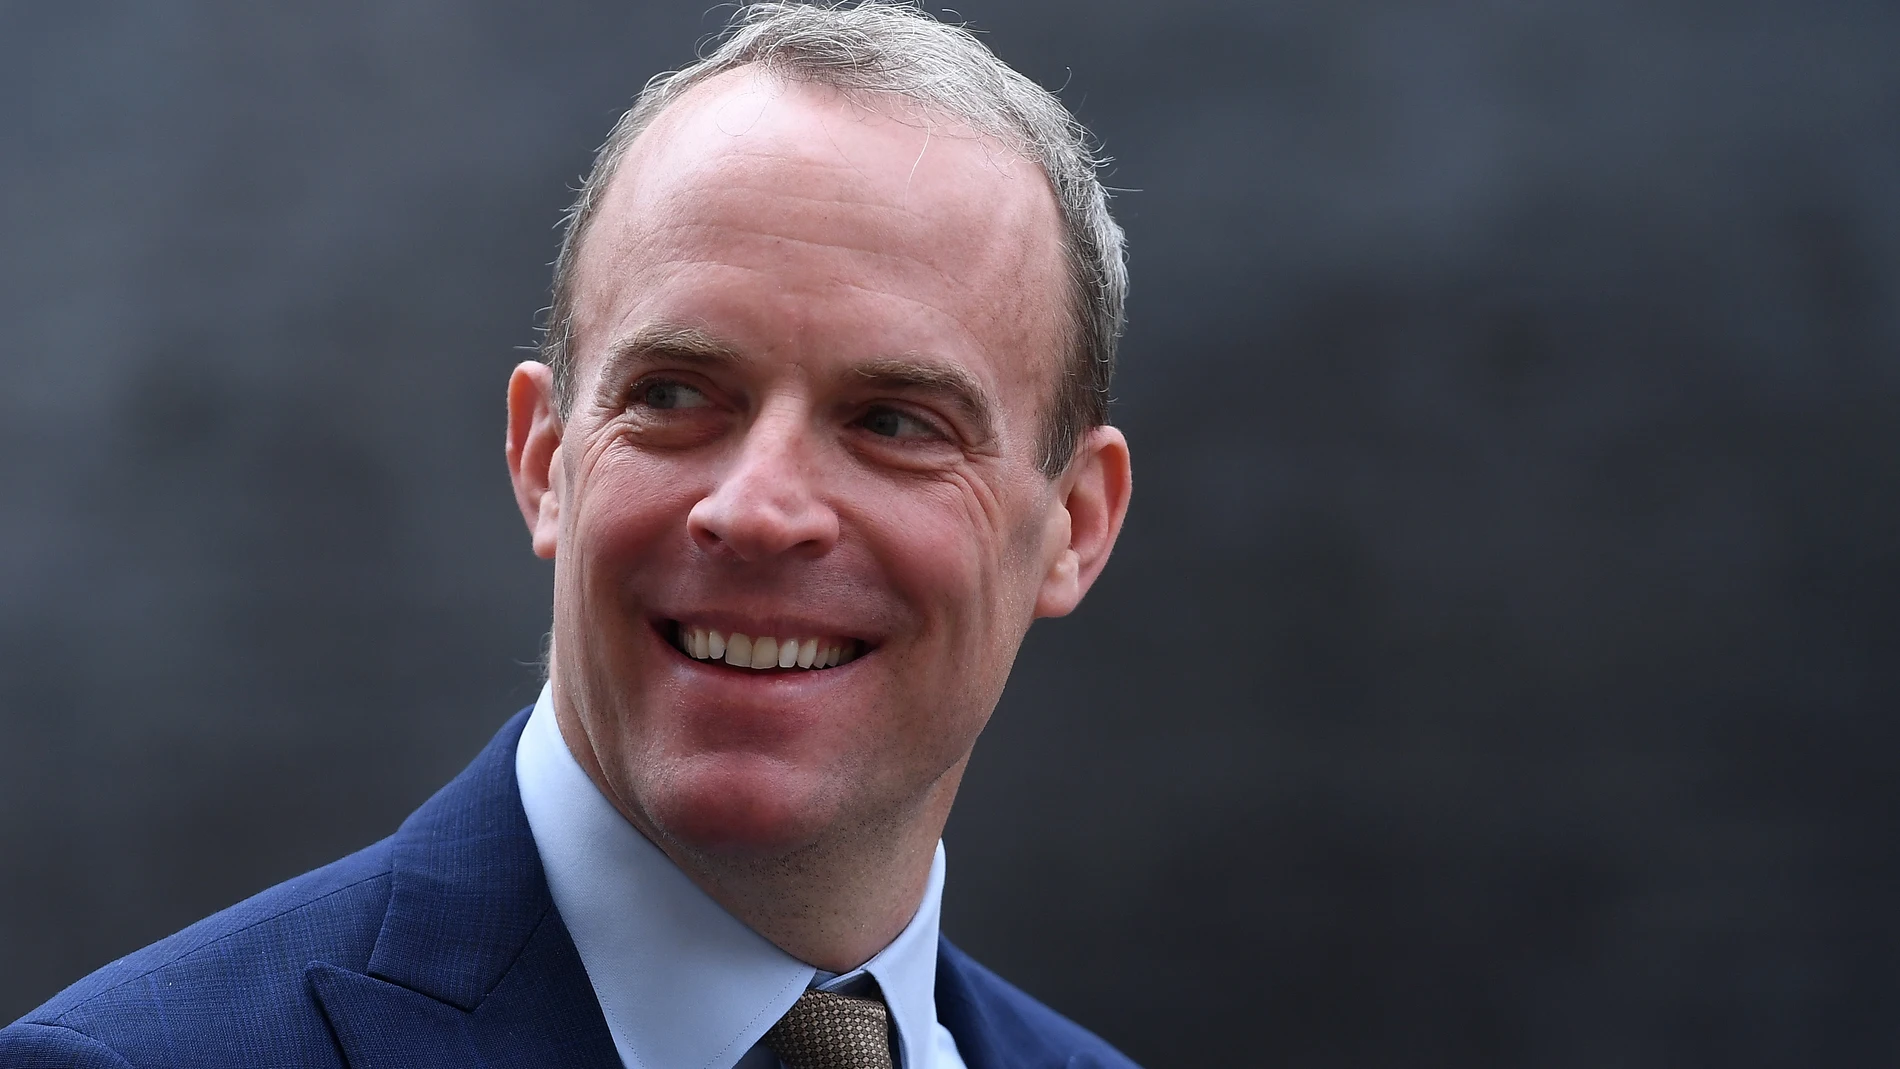 London (United Kingdom), 21/02/2023.- (FILE) - British Deputy Prime Minister Dominic Raab departs 10 Downing Street following a cabinet meeting in London, Britain, 21 February 2023 (reissued 21 April 2023). Raab resigned on 21 April following allegations of bullying behavior. (Reino Unido, Londres) EFE/EPA/ANDY RAIN 